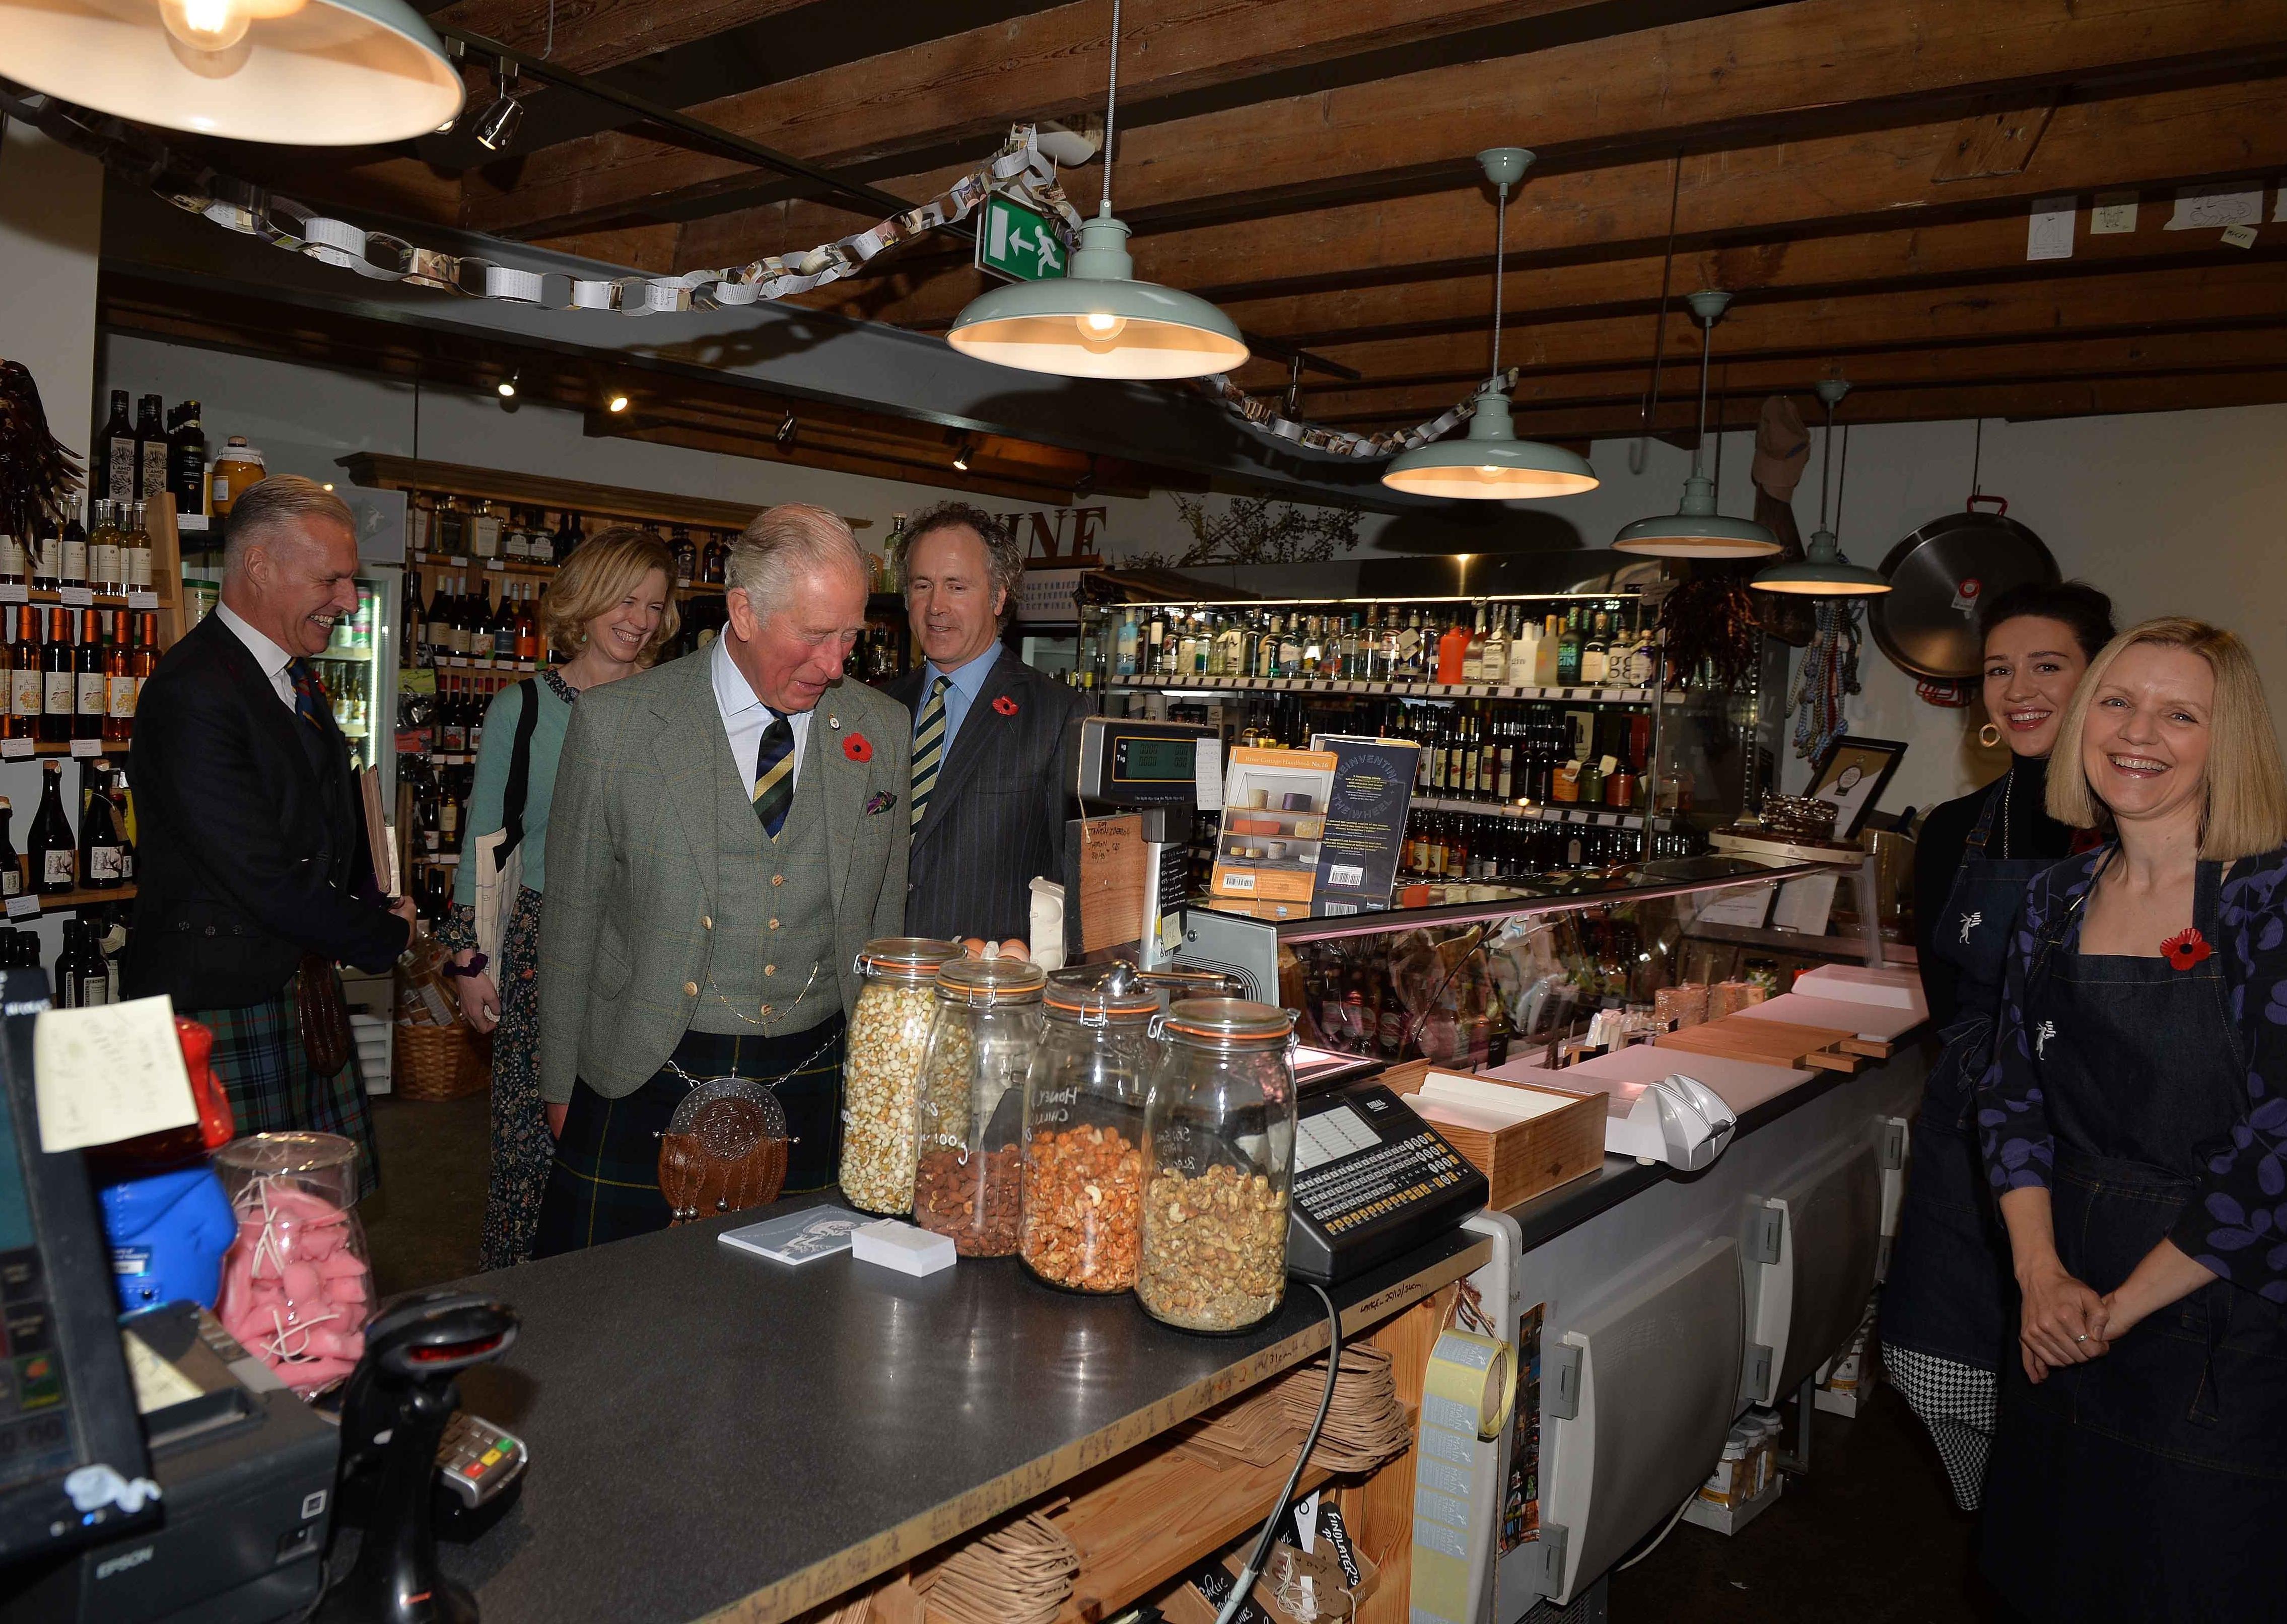 The Duke of Rothesay is shown around the Mainstreet Trading Company deli.